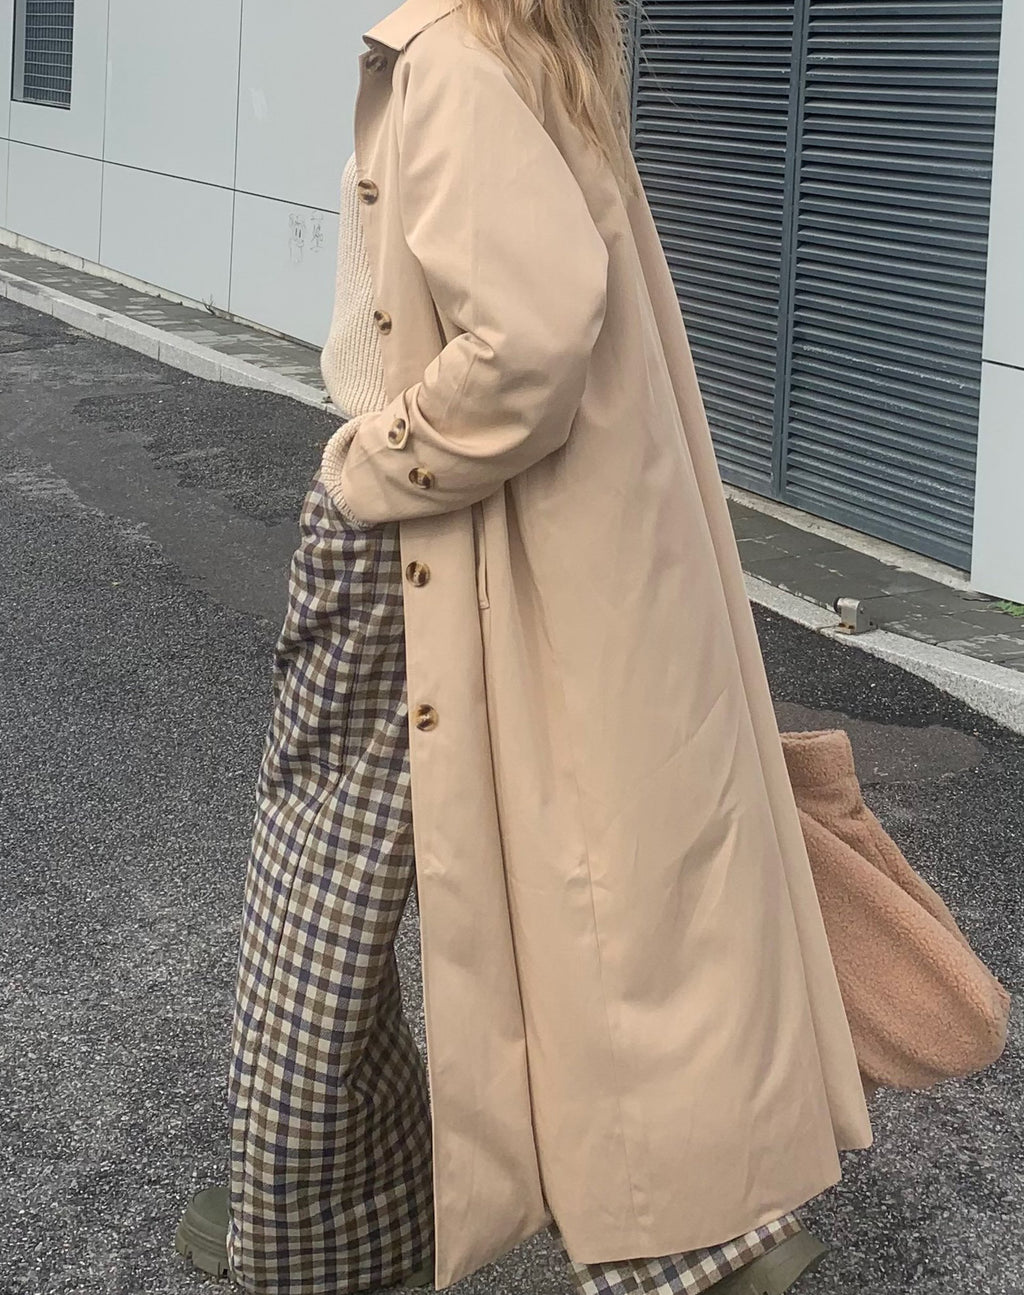 Assa Trench Coat in Beige with Stripe Lining